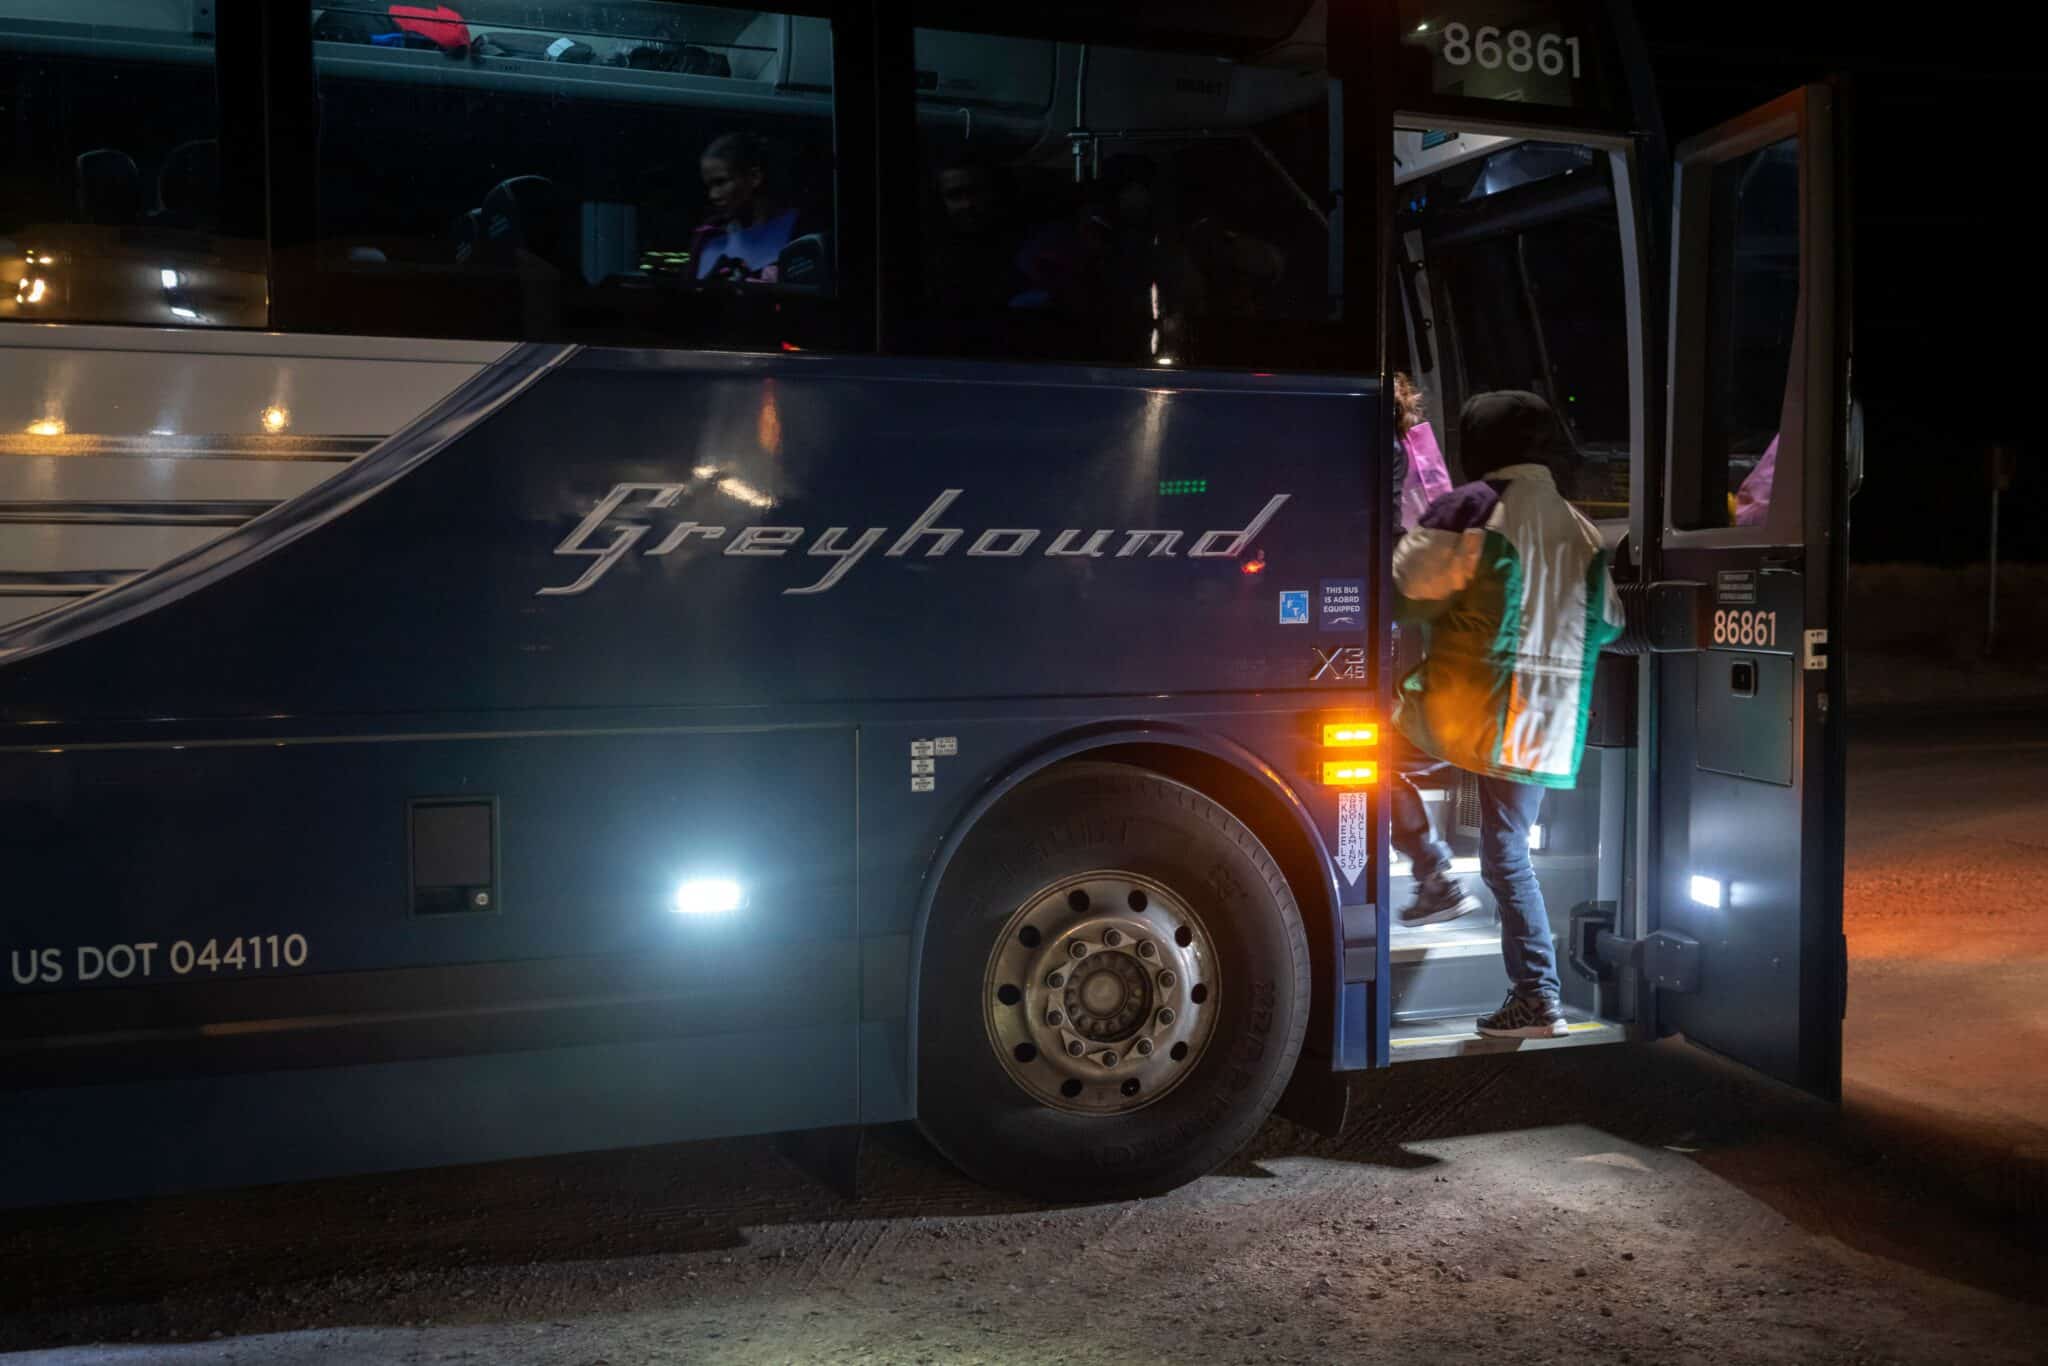 Ricardo Chub-Bo, 40, and his daughter Rosa Maria, 14, from Poptun in El Petun department, Guatemala, board the Greyhound bus they will take to Albuquerqe before their three-day journey through the United States to Philadelphia on January 3, 2019 in Dona Ana, New Mexico. - They spent eight days in migration detention and were released with a group of about 20 Central American migrants to the Basilica of San Albino in Mesilla, New Mexico, which provided them hospitality the night of their release.  Ricardo relies on his daughter to help read letters and numbers, while she relies on him to communicate in Spanish, as she still isnt used to speaking it. The two speak to each other in their mother tongue of K'iche', a Maya language spoken in the central highlands of Guatemala. The church had provided them with a piece of paper that asks for help finding the connection in English and a phone number to call if they need help. For them, luckily, they ran into another group of Guatemalans going on the same bus, which they could team up with in case they had trouble. (Photo by Paul Ratje / AFP)        (Photo credit should read PAUL RATJE/AFP via Getty Images)